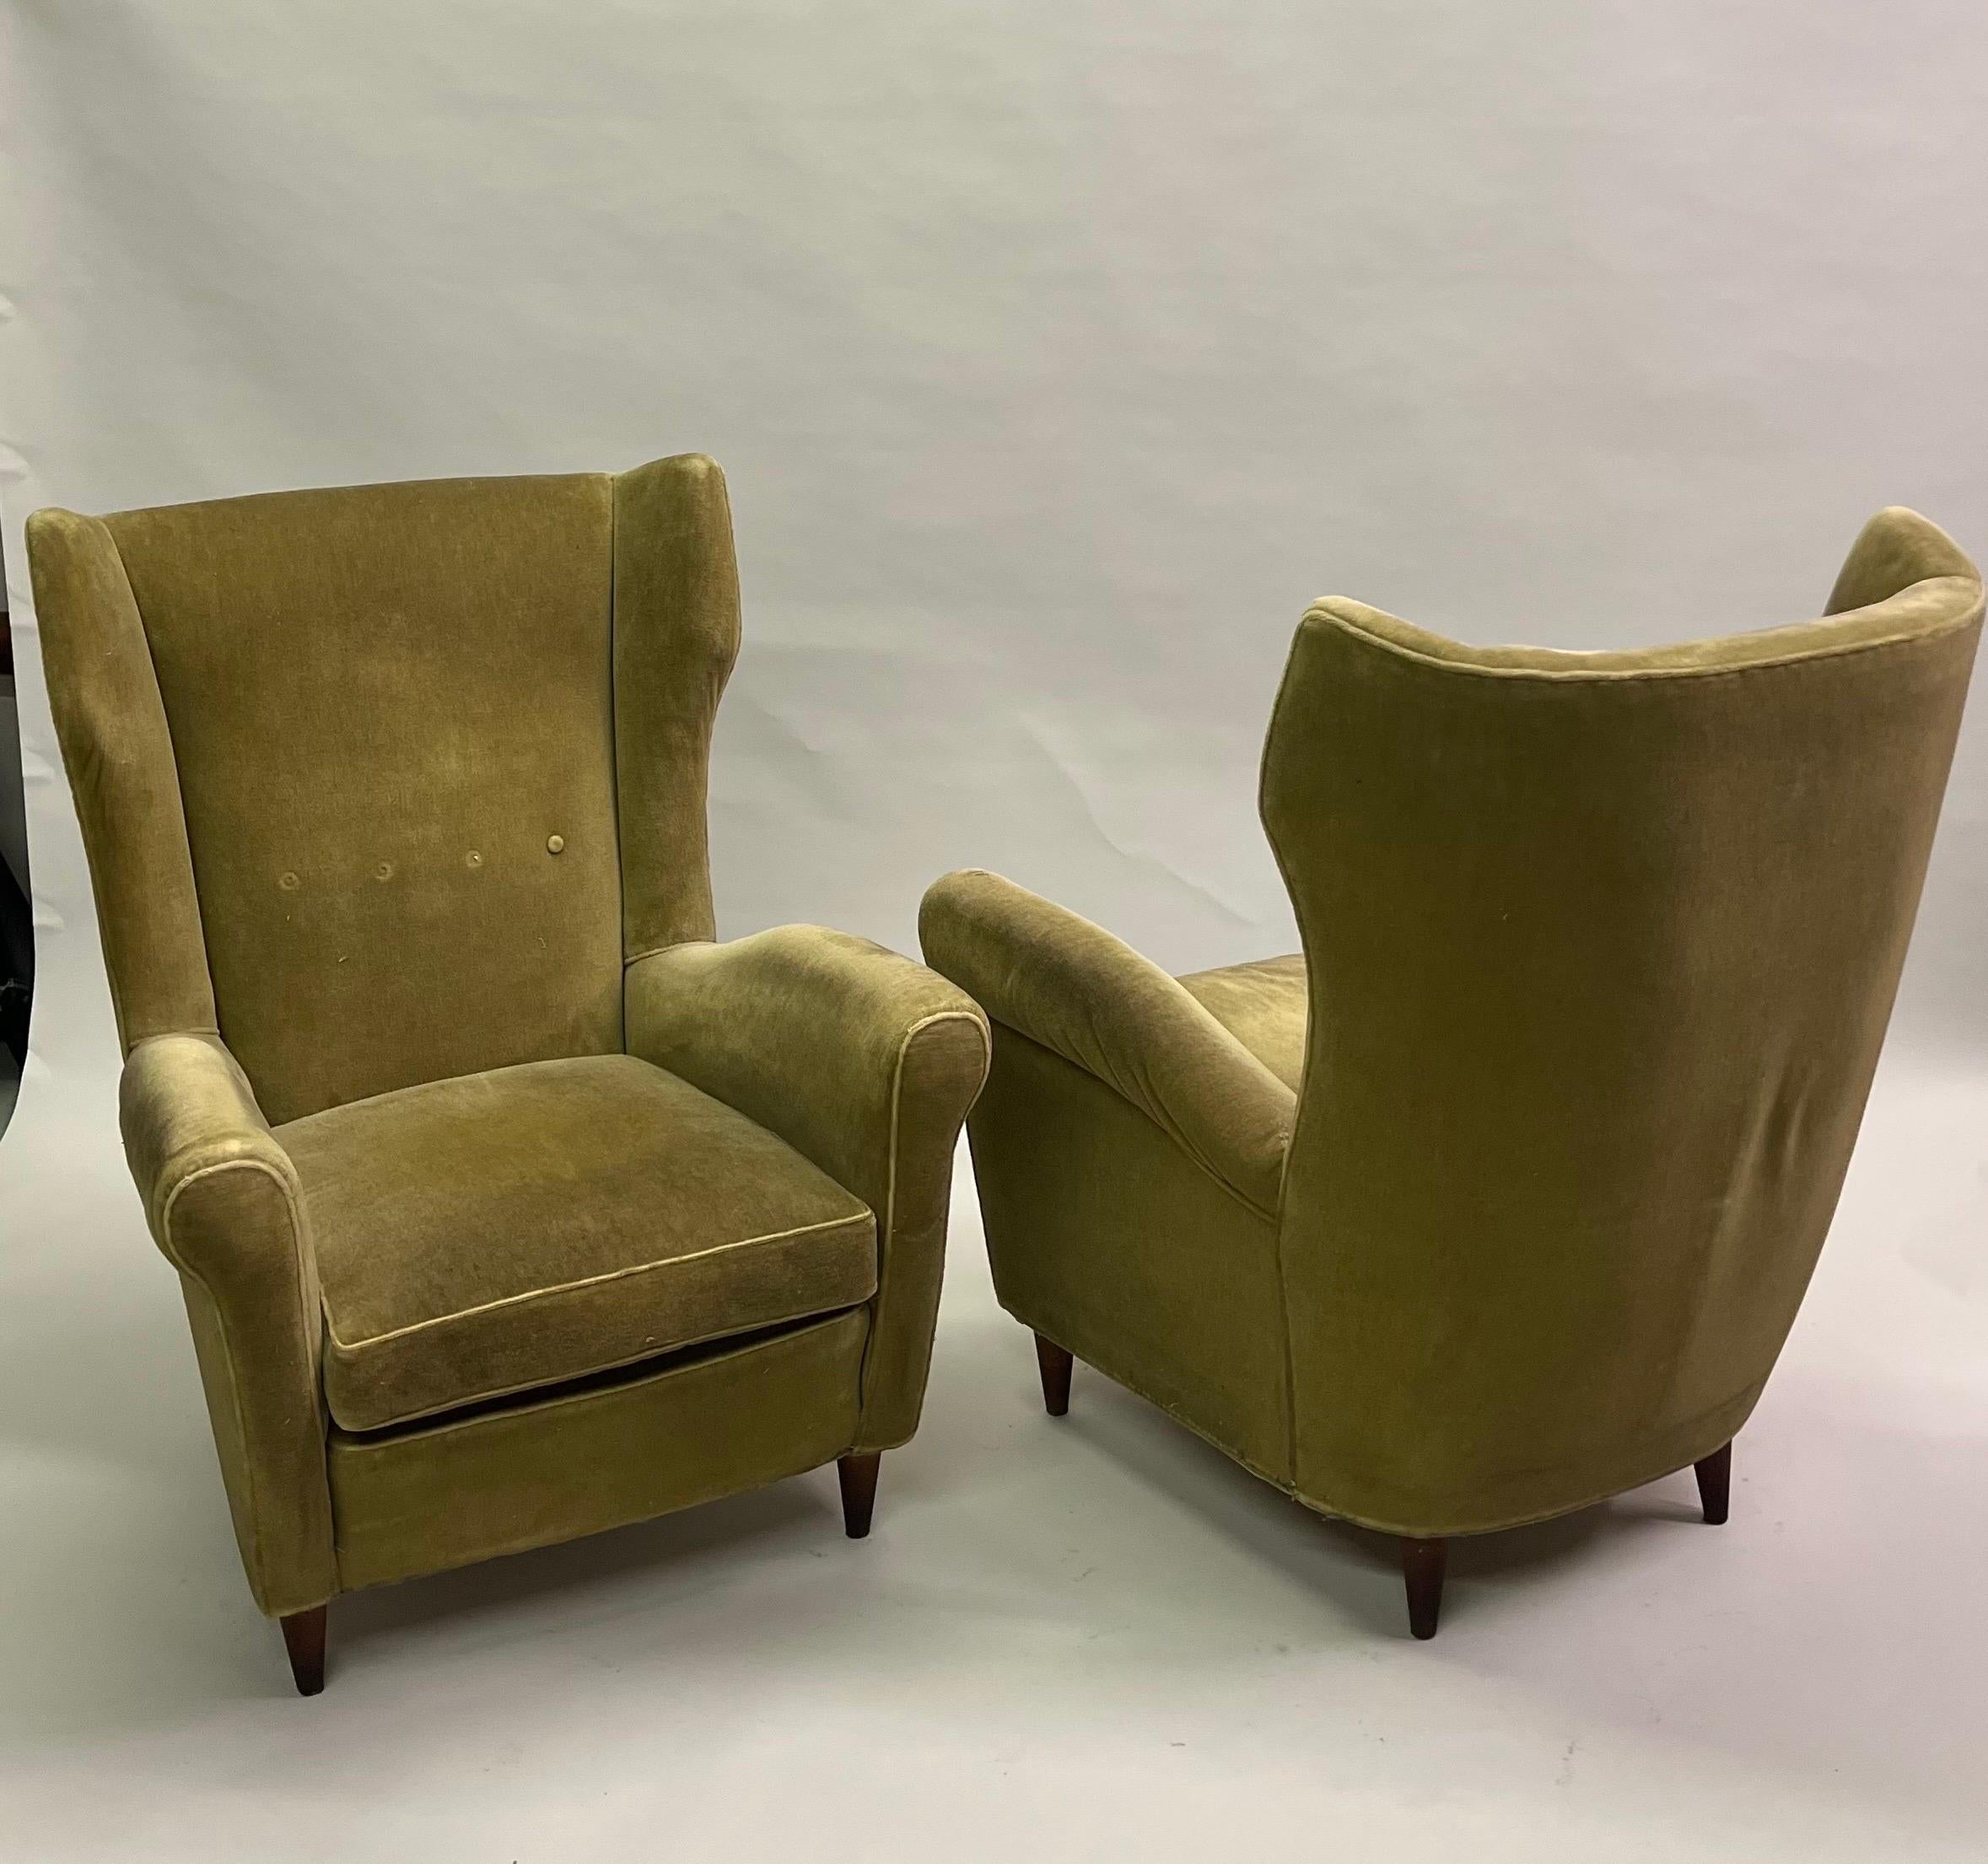 An elegant, stunning pair of Italian Mid-Century Modern armchairs or lounge or wingback or high back chairs attributed to Gio Ponti, 1955 . Gio Ponti was known for working in the Modern Neoclassical style; these chairs reflect that and can define